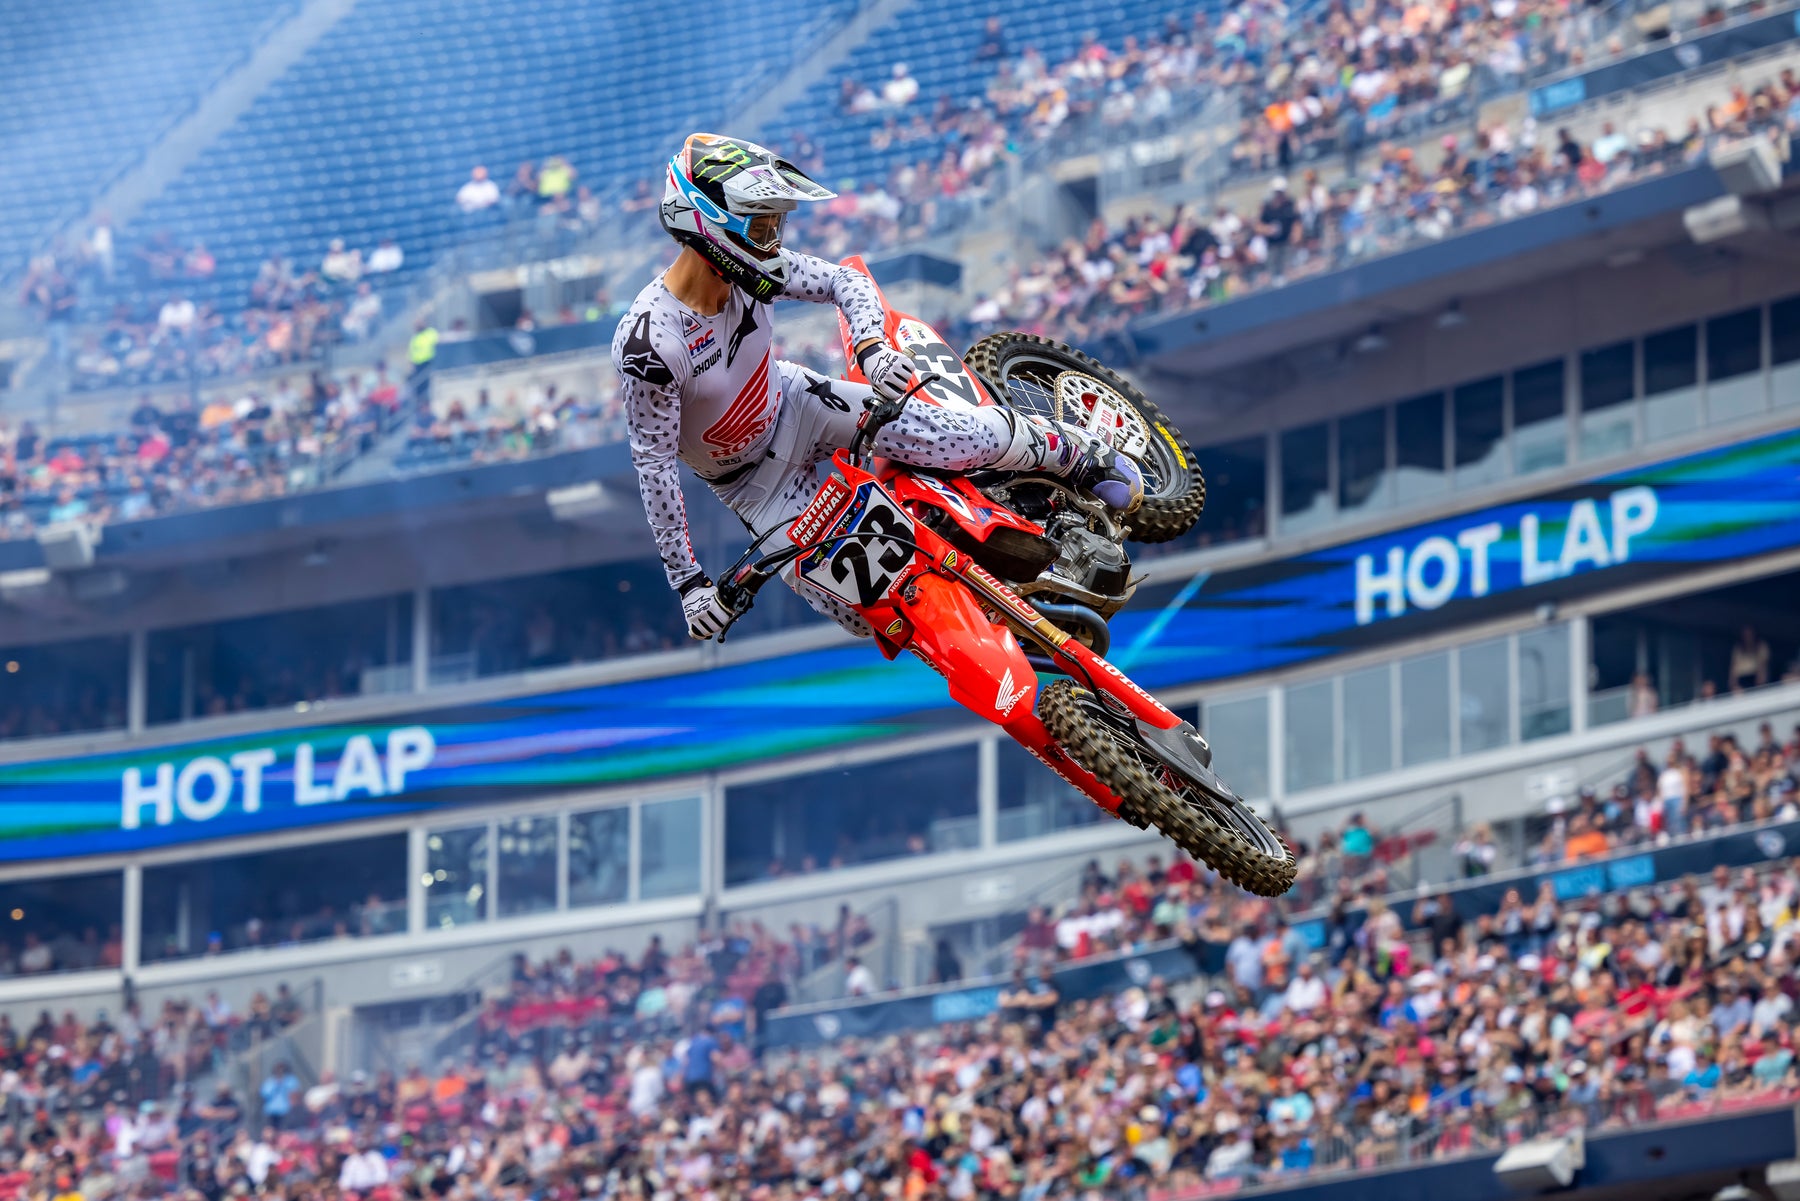 ALPINESTARS 1-2 AS CHASE SEXTON HITS THE RIGHT NOTES TO EDGE ELI TOMAC IN 450SX THRILLER IN NASHVILLE